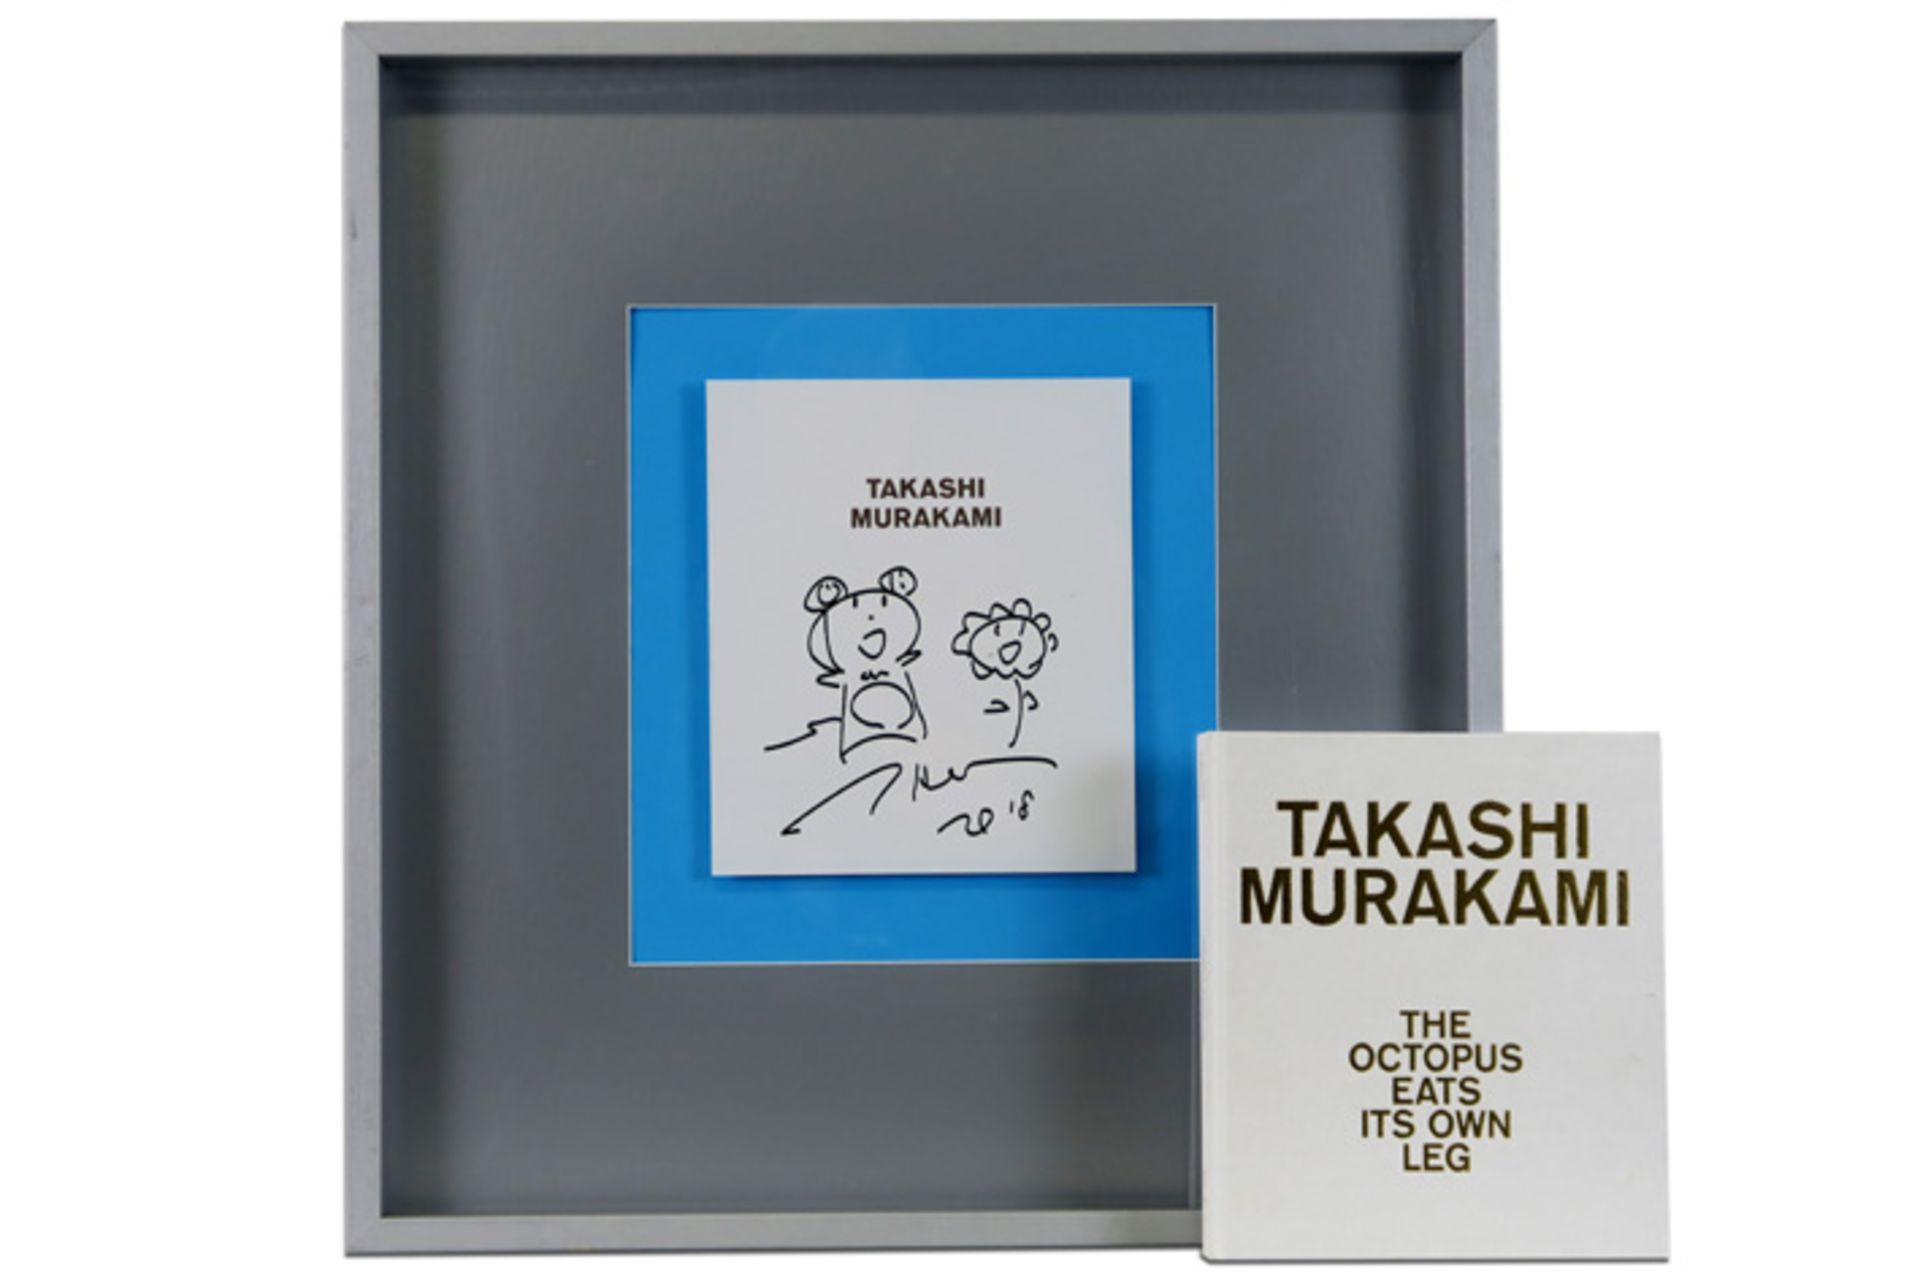 signed Takashi Murakami drawing - sold with a copy of the book "The Octopus eats its own leg" - Image 5 of 5